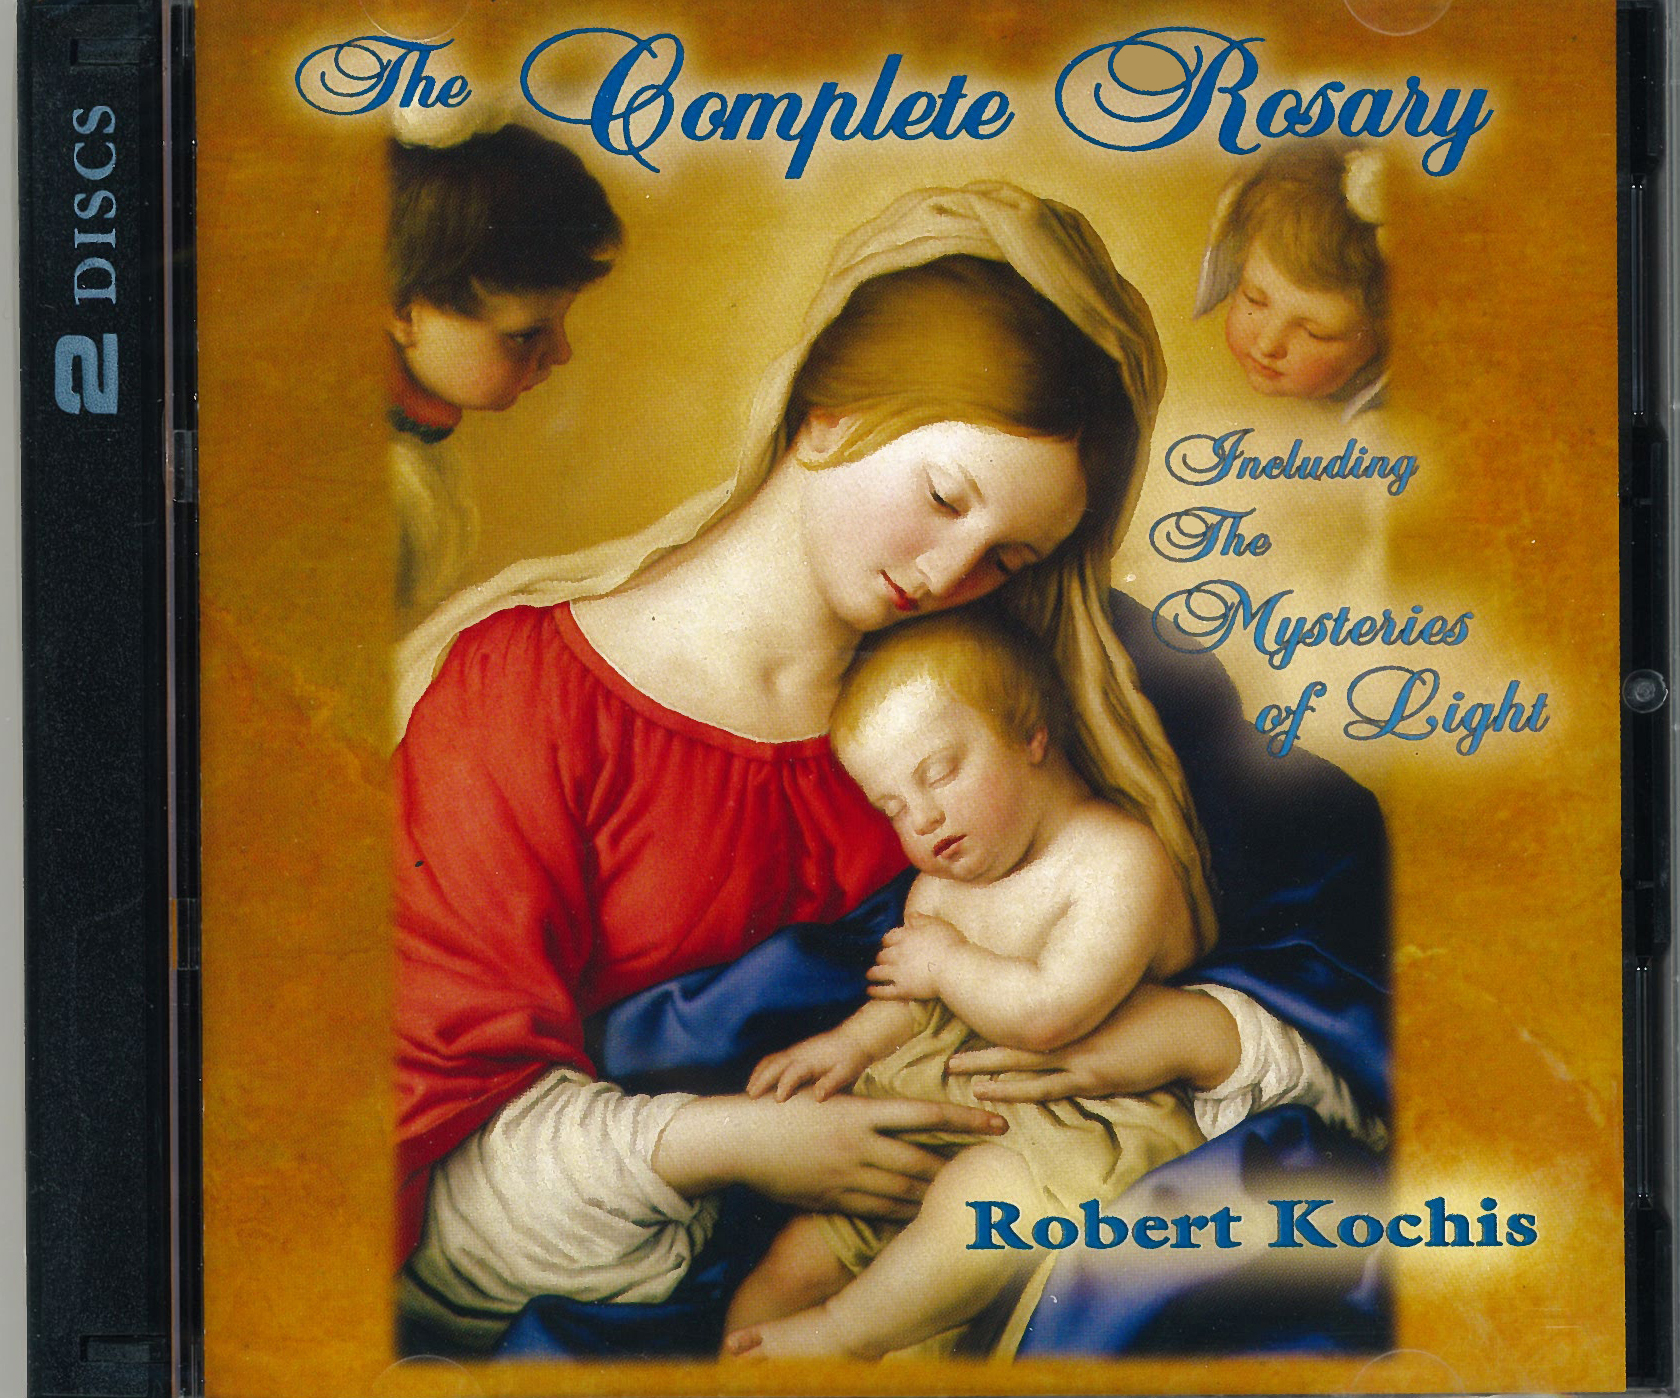 The Complete Rosary with Robert Kochis 88-5911011052